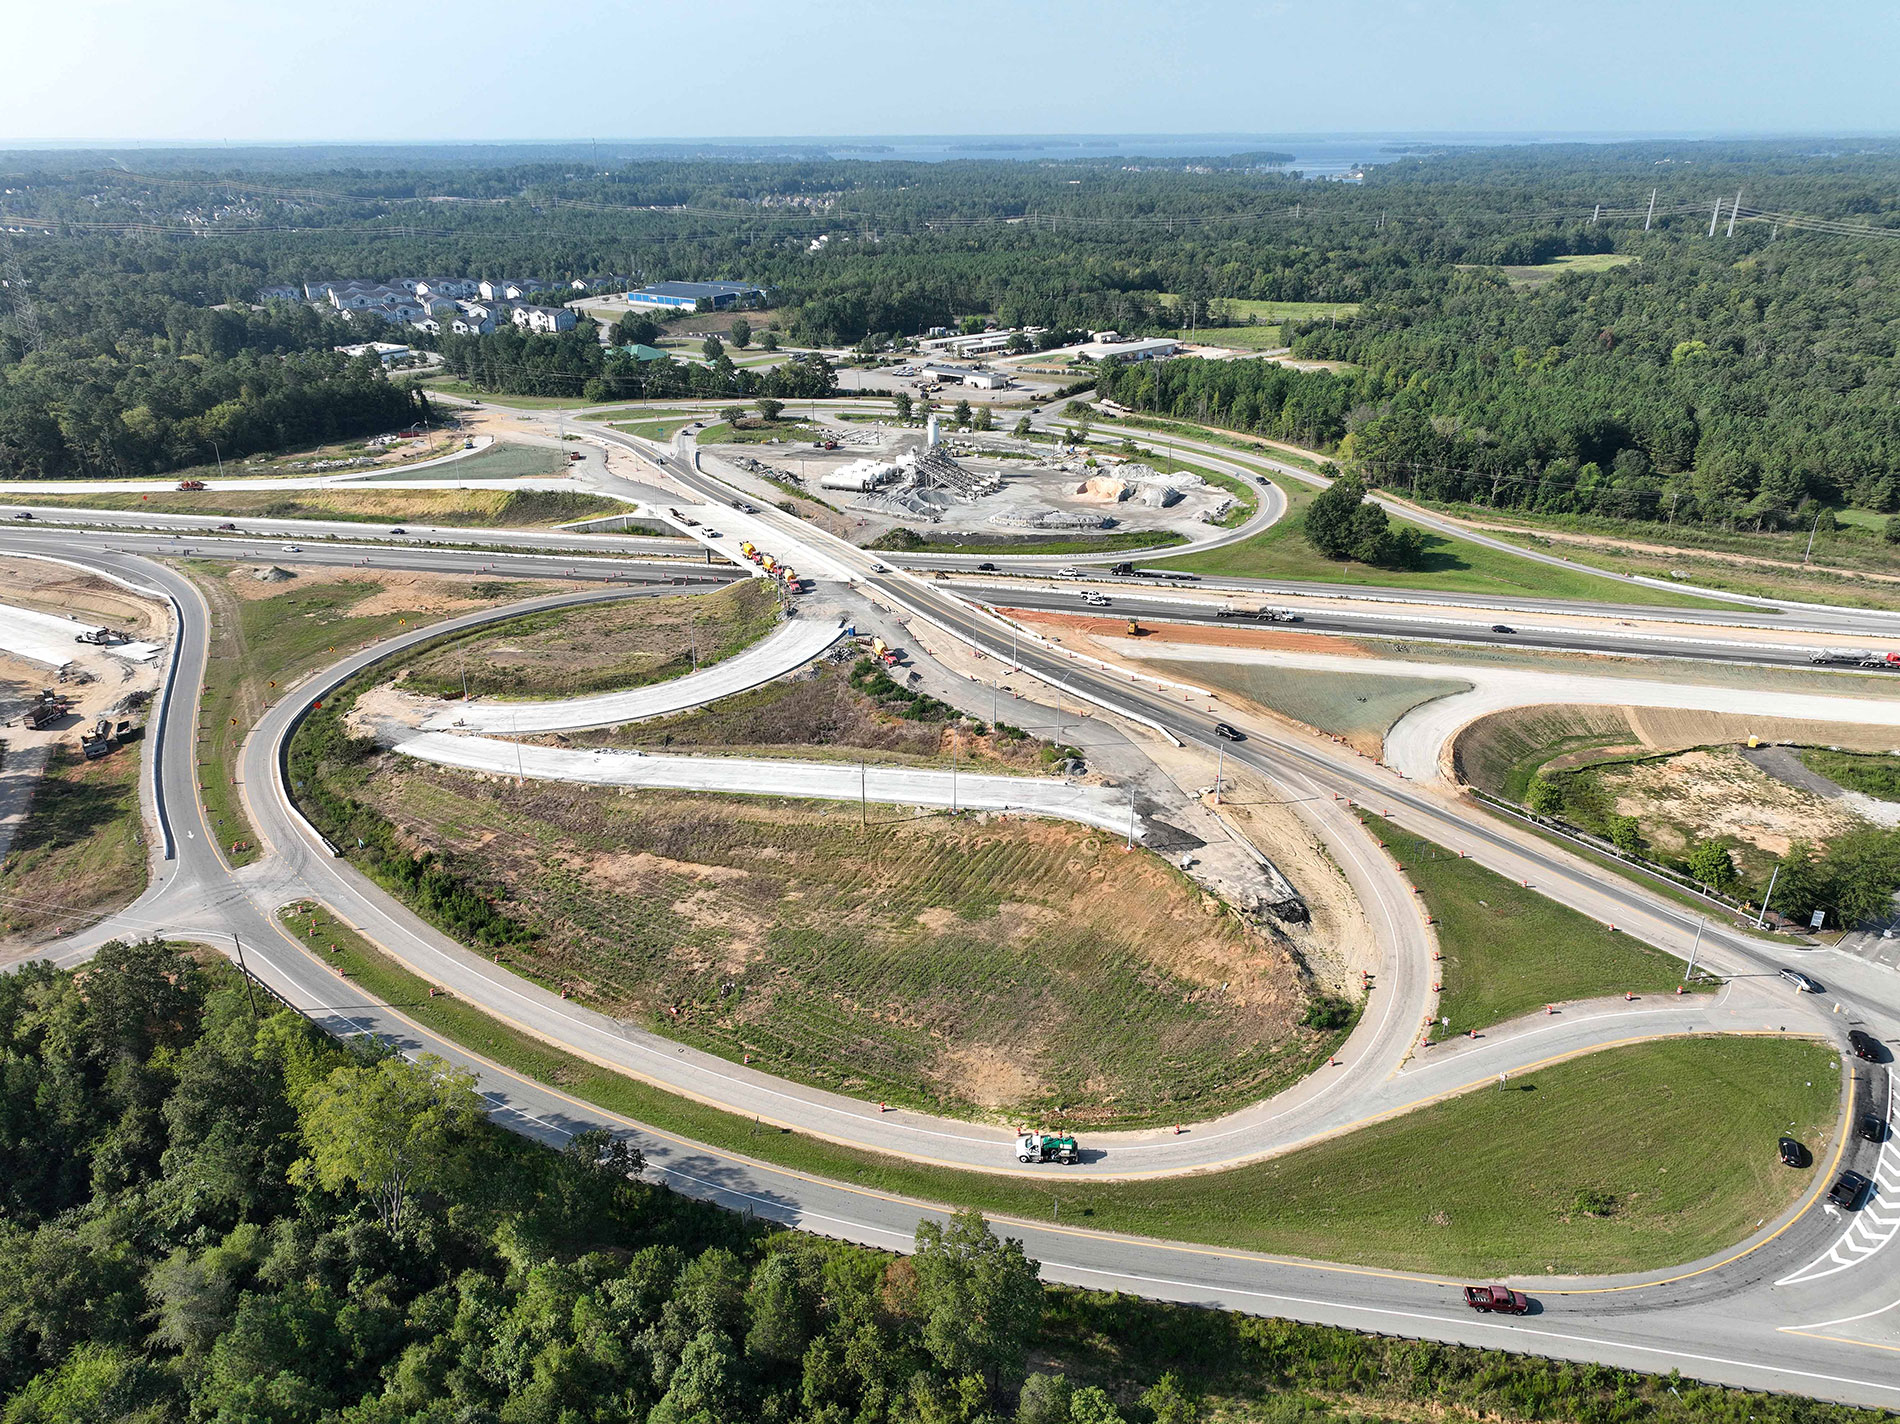 This photo shows the progress on the interchange at Exit 97, Broad River Road.